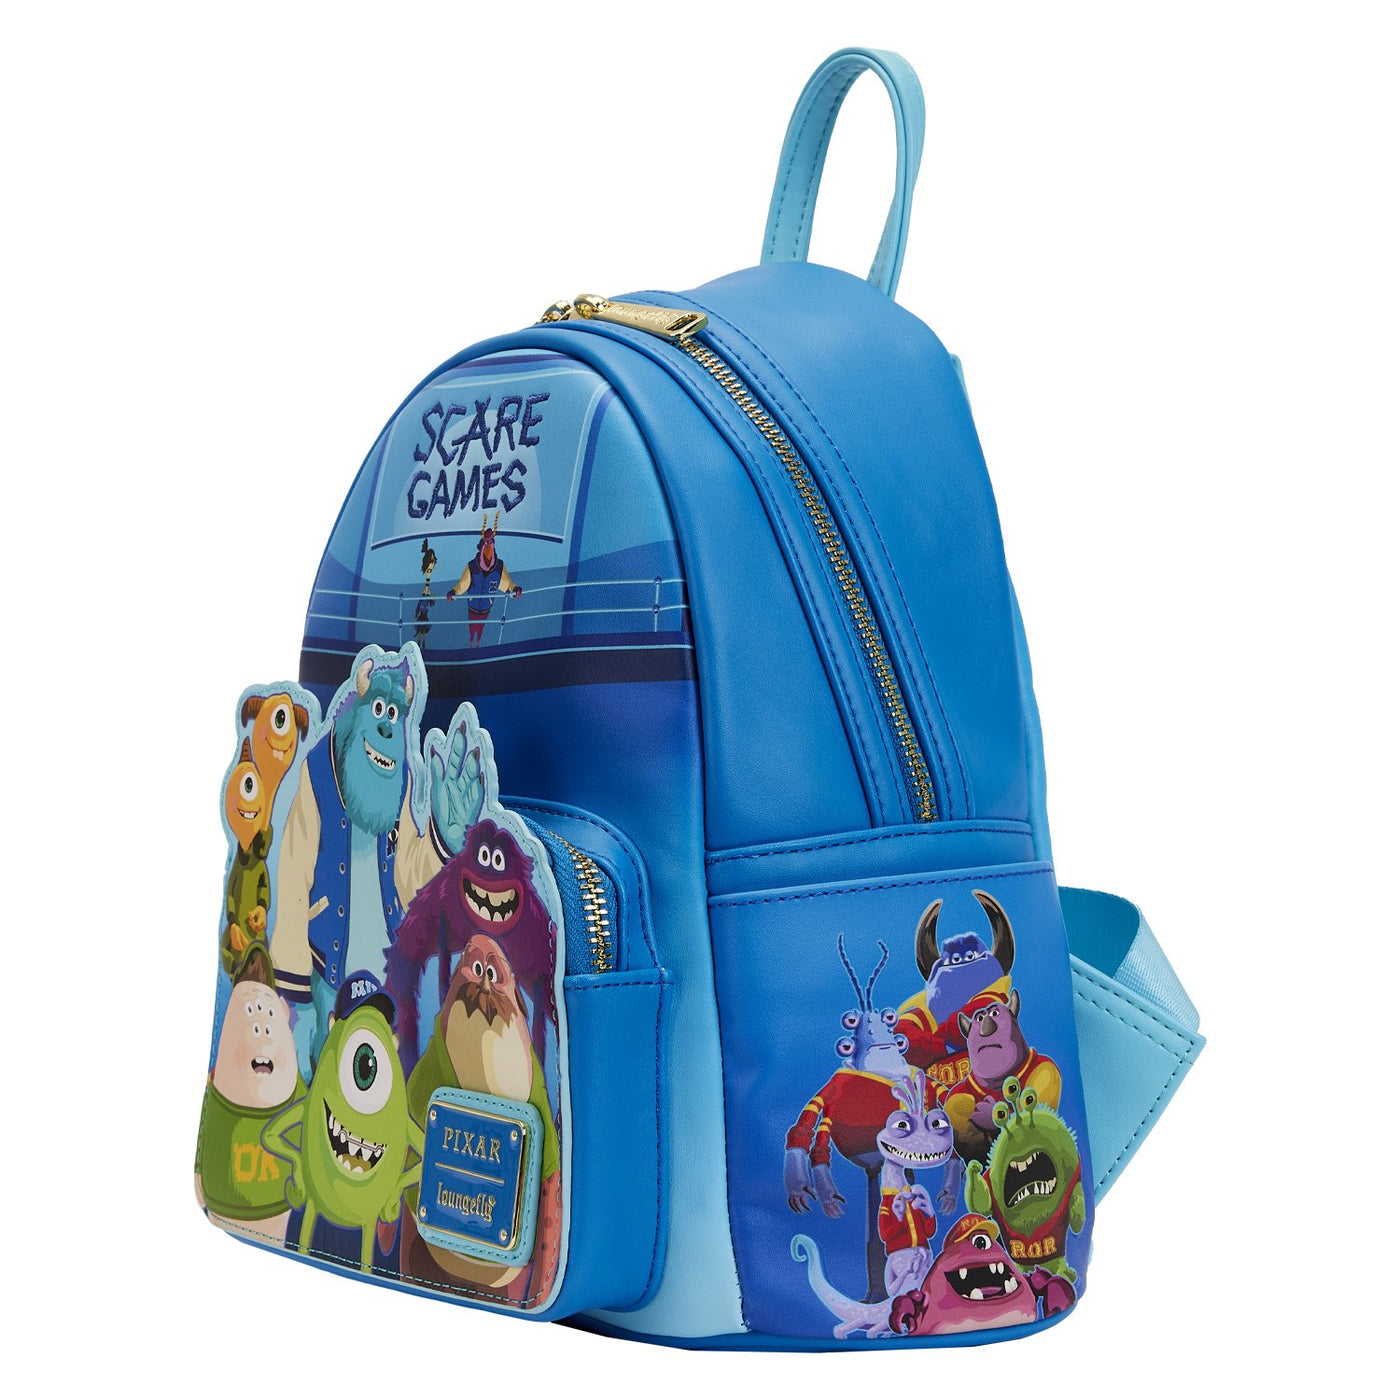 Loungefly Pixar Monsters University Scare Games Mini Backpack - Side View